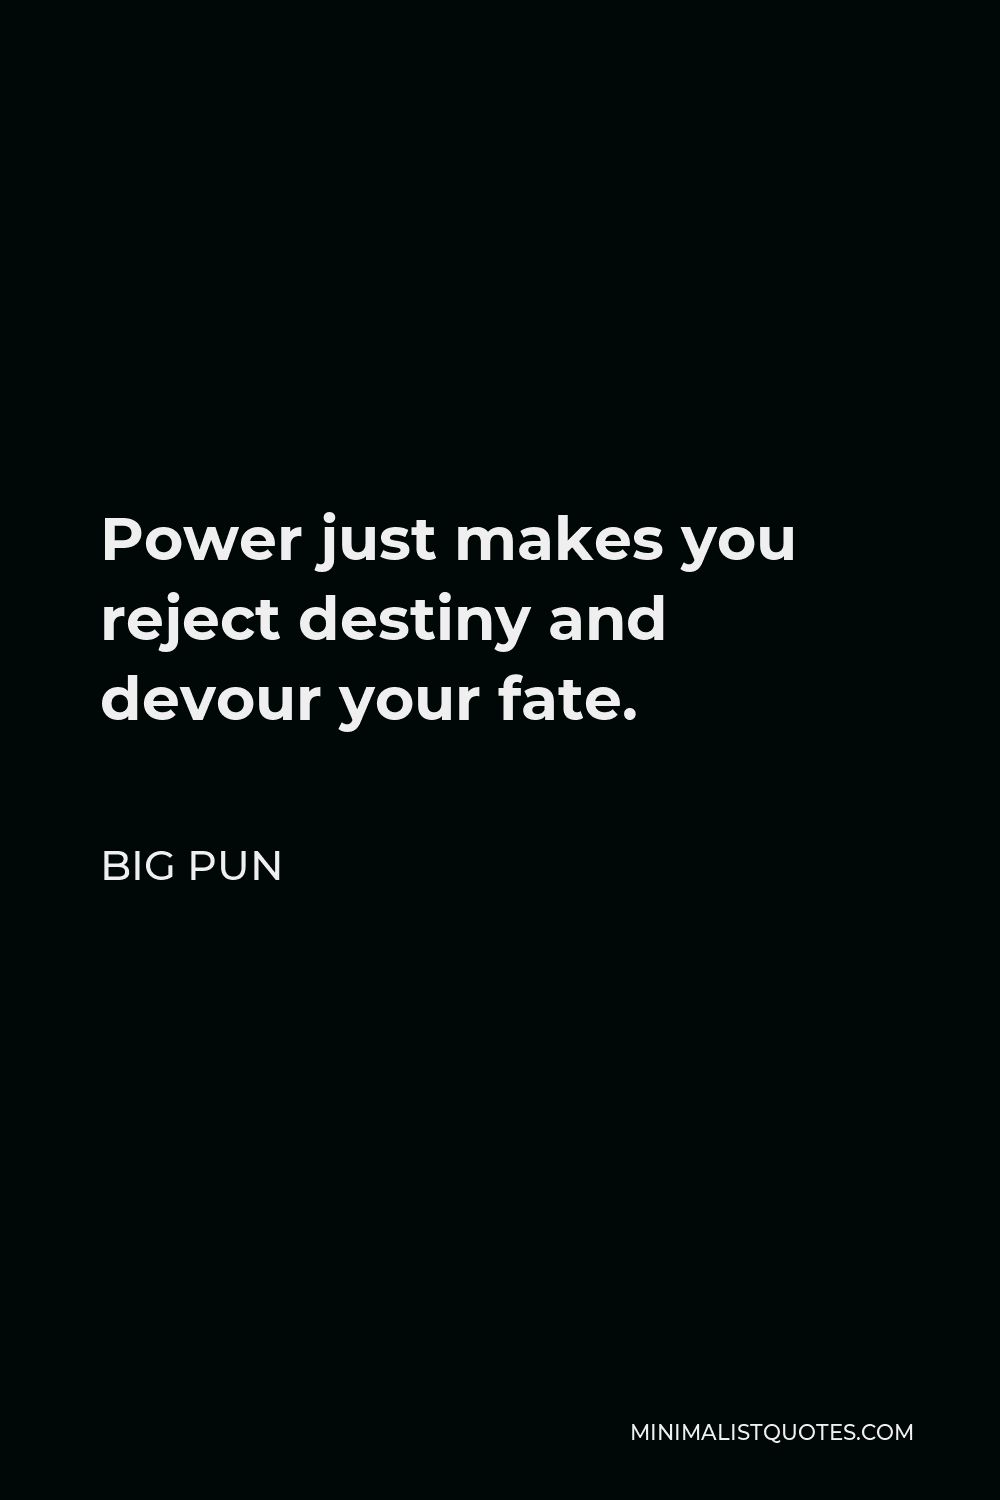 Big Pun Quote - Power just makes you reject destiny and devour your fate.